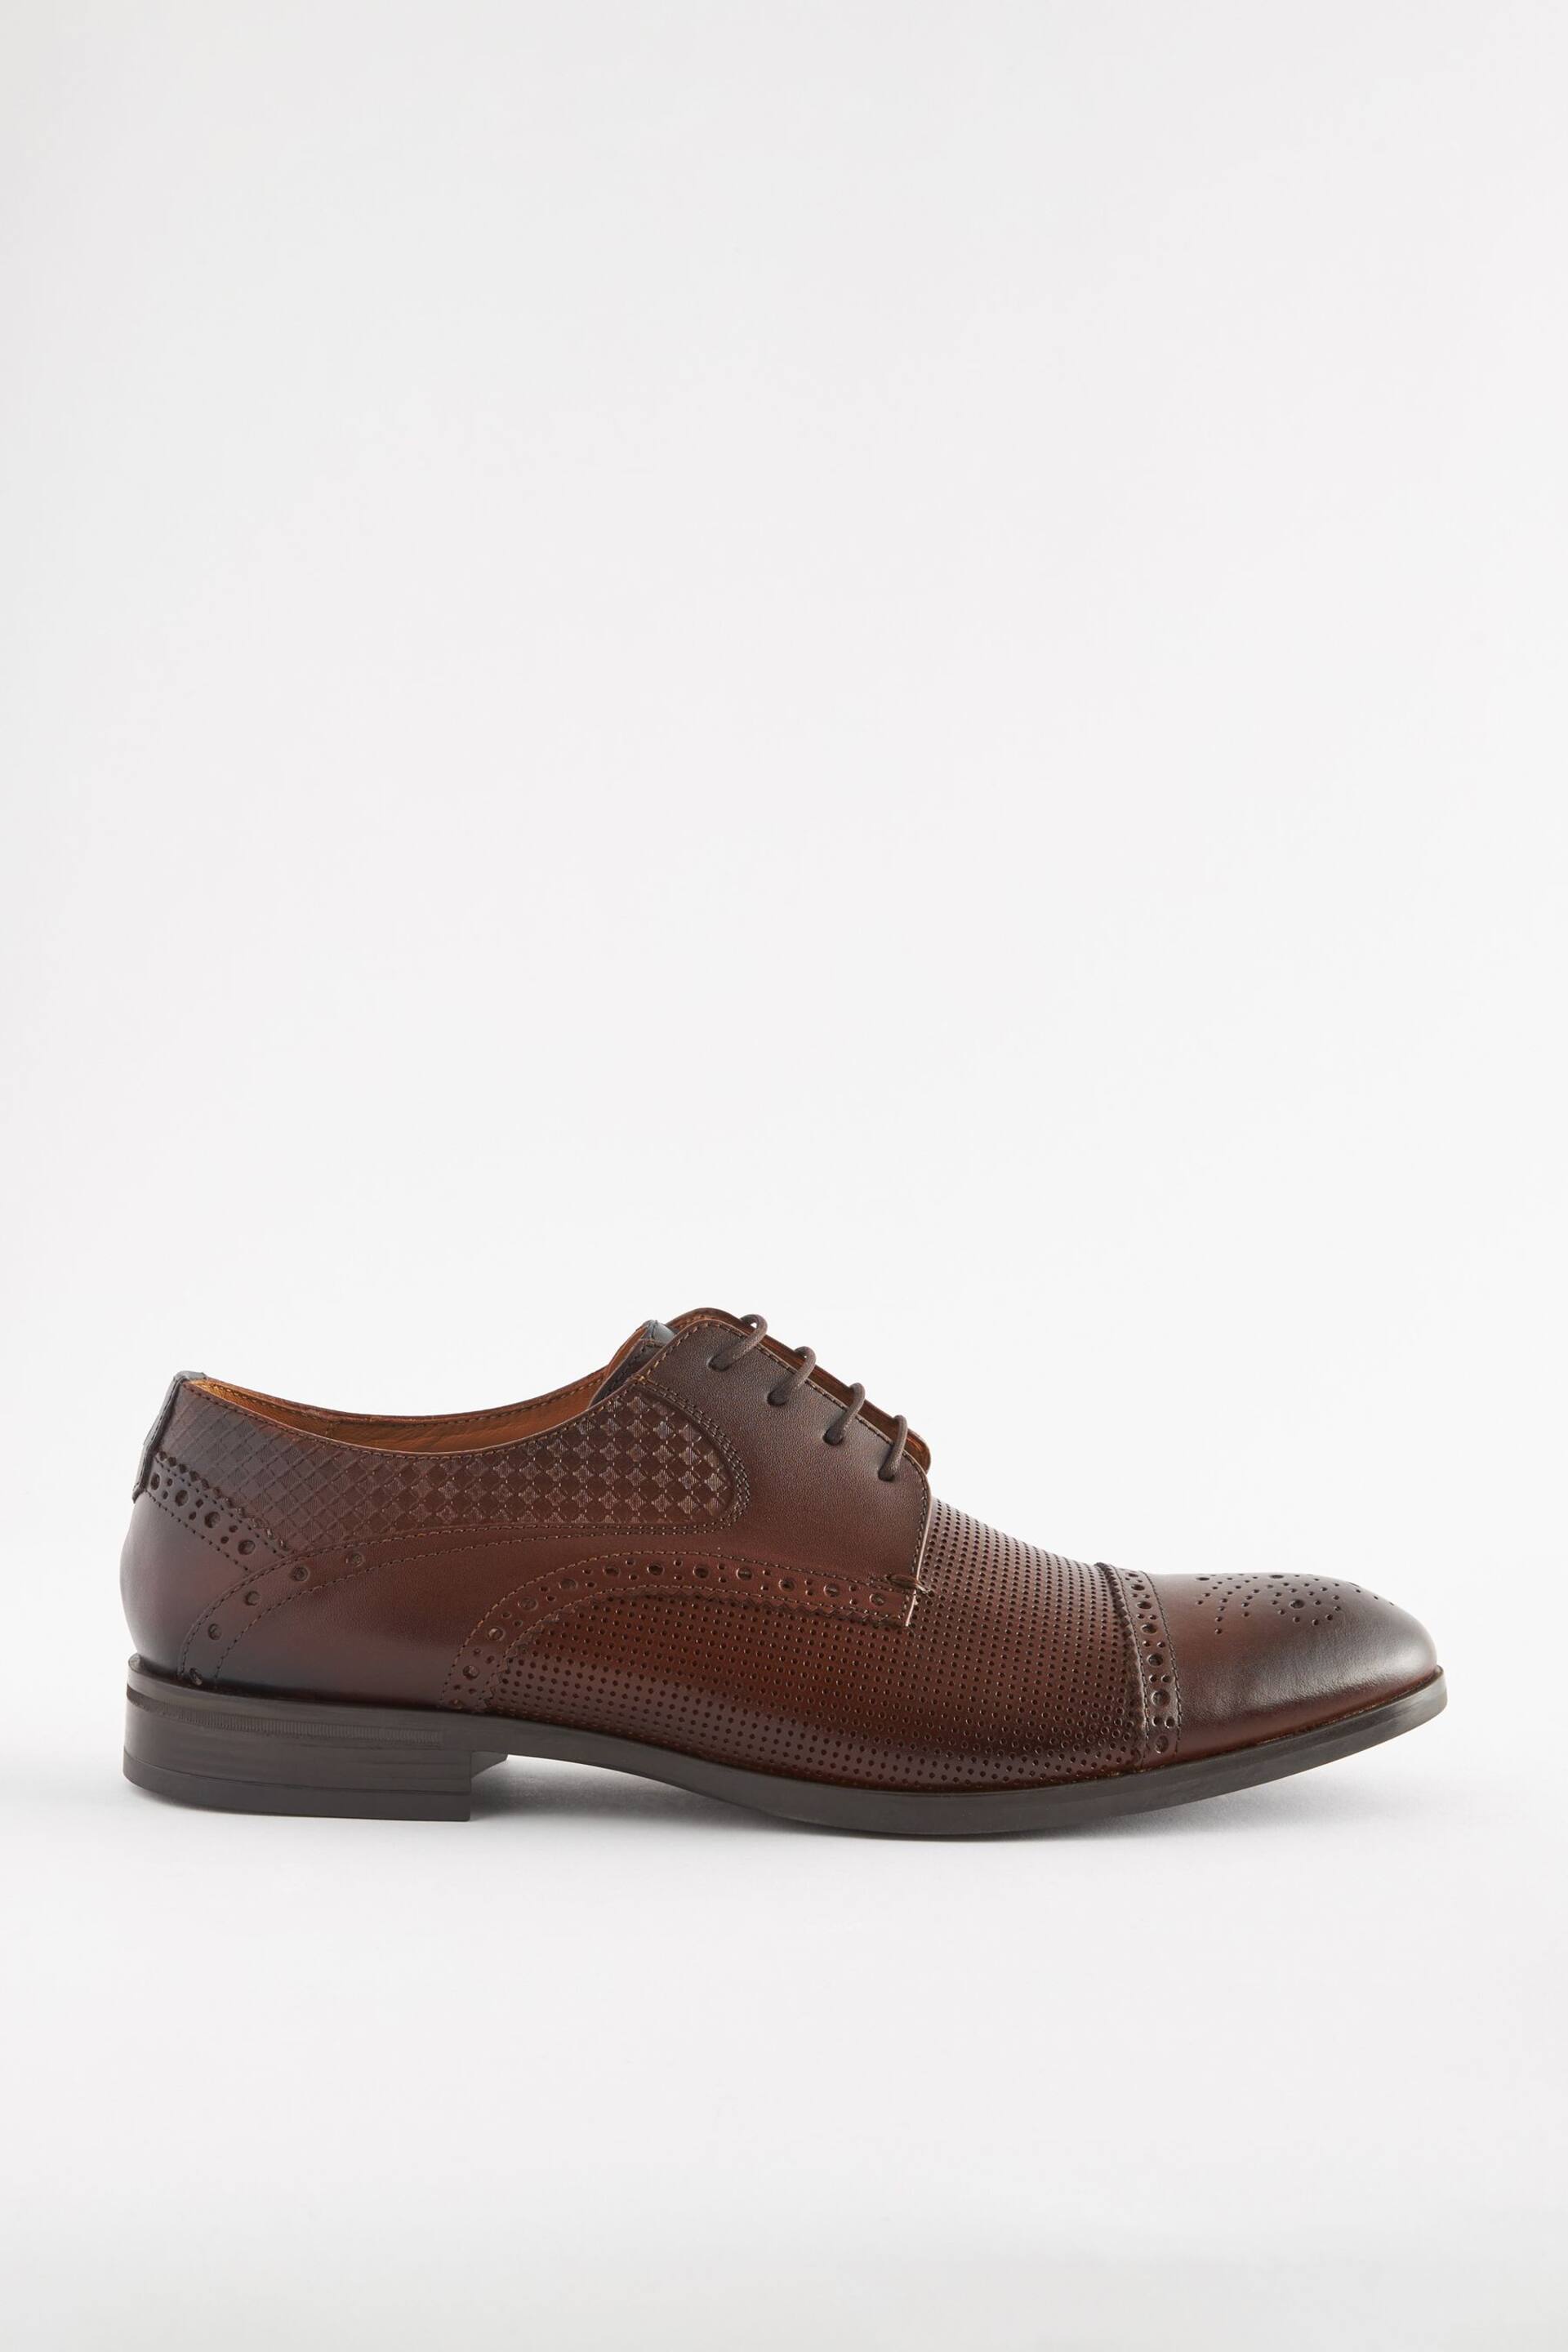 Brown Leather Embossed Brogues Shoes - Image 2 of 7